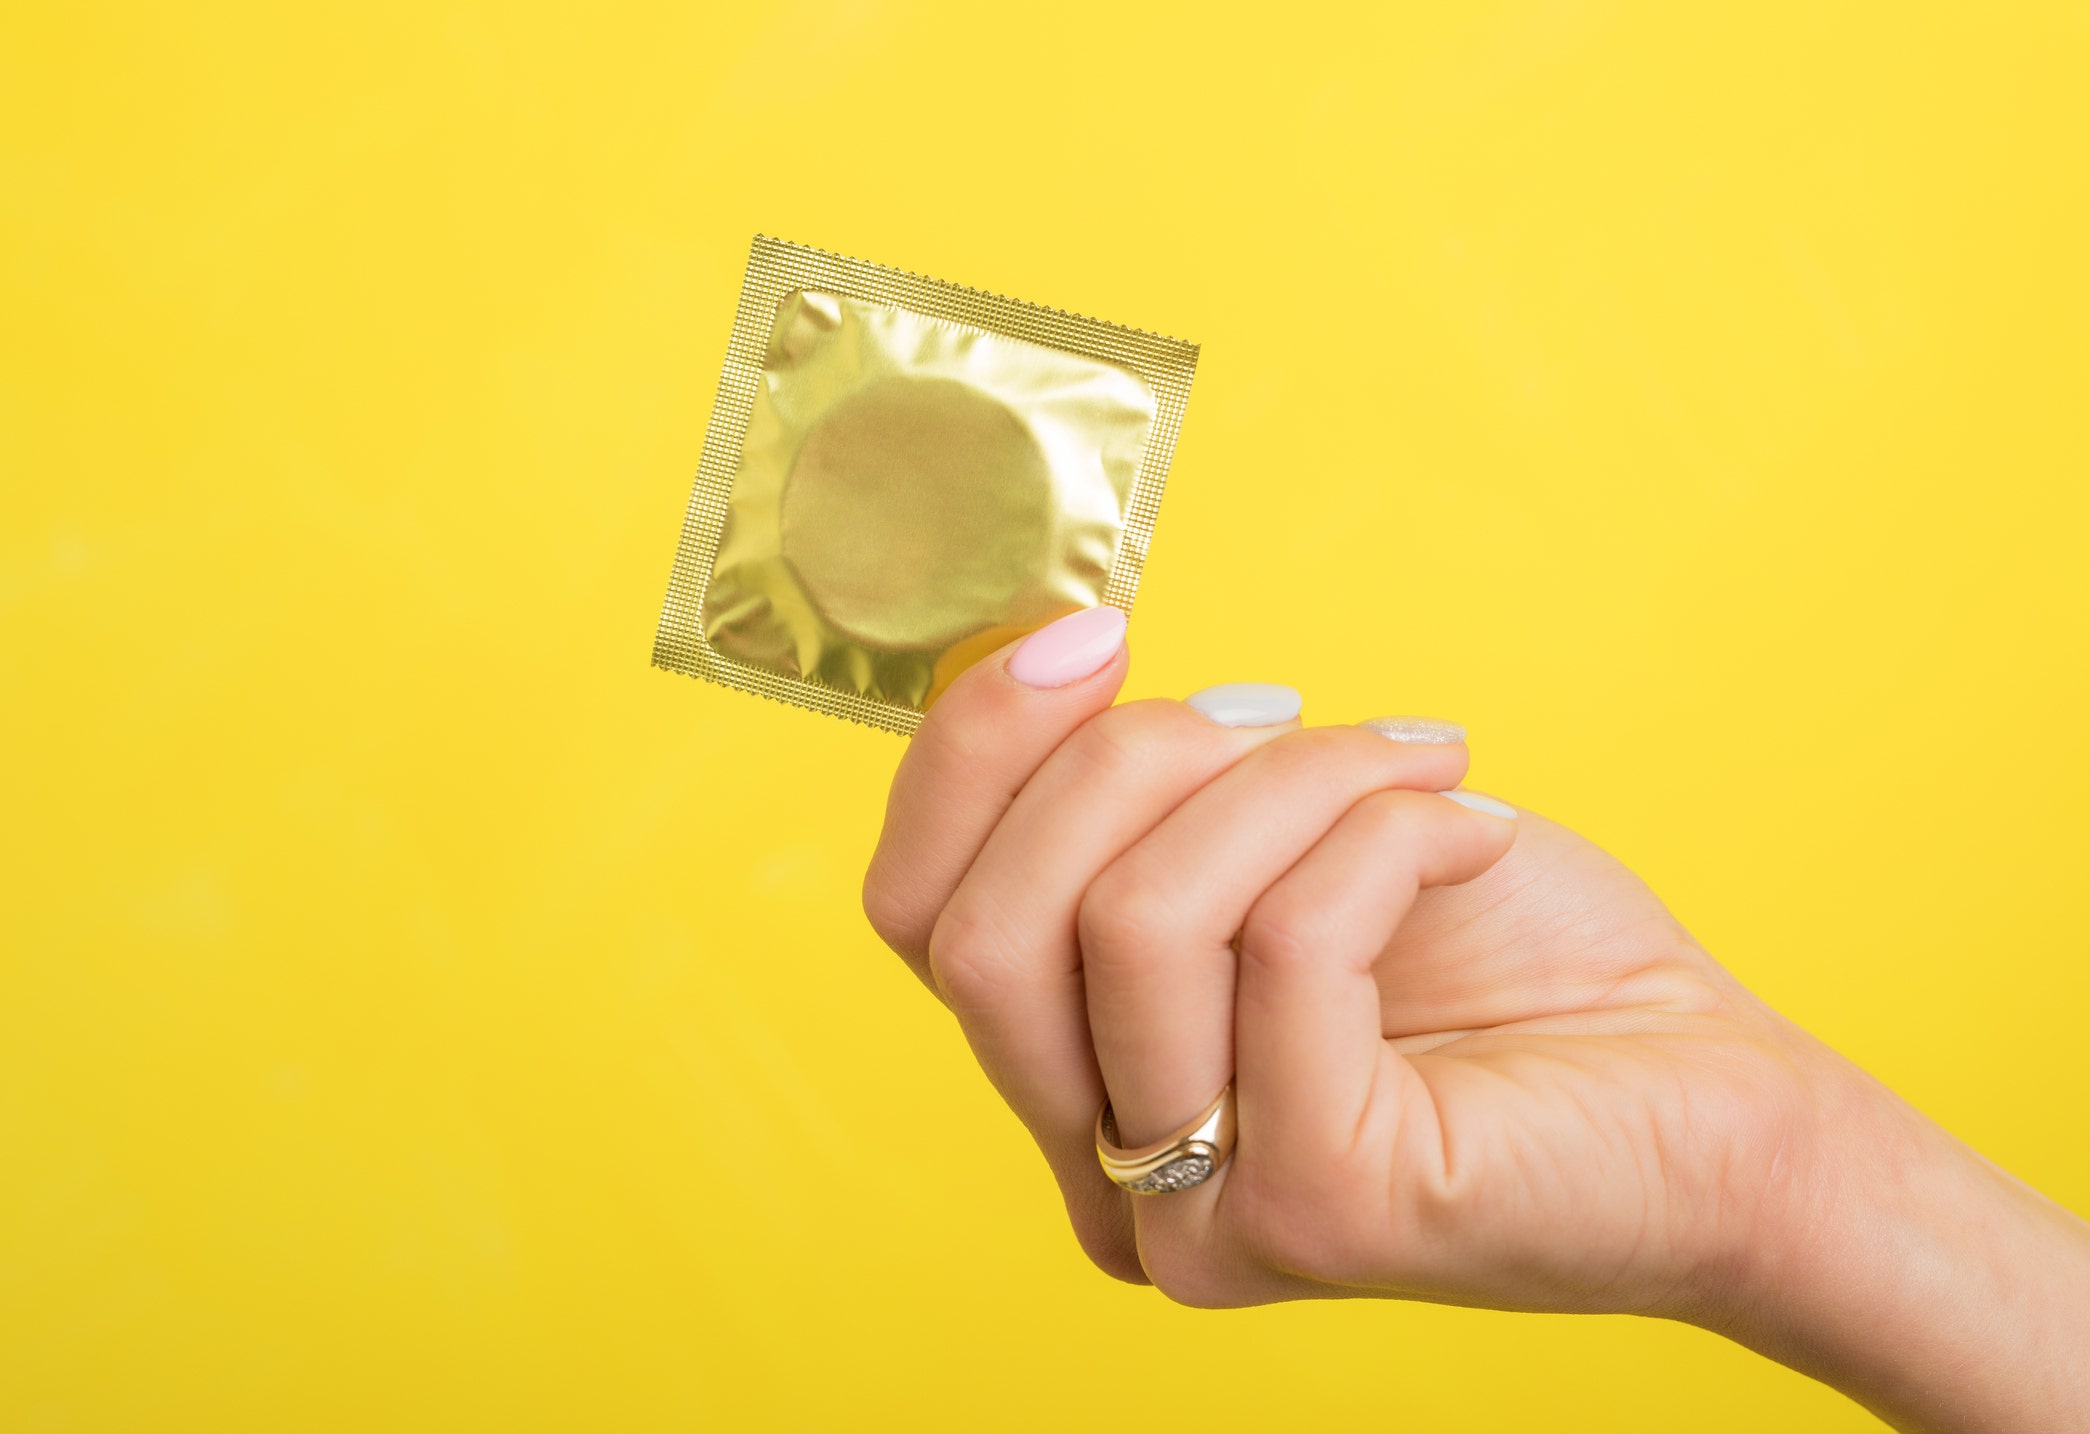 in Michigan and need a condom, you’re in luck: The state health department ...